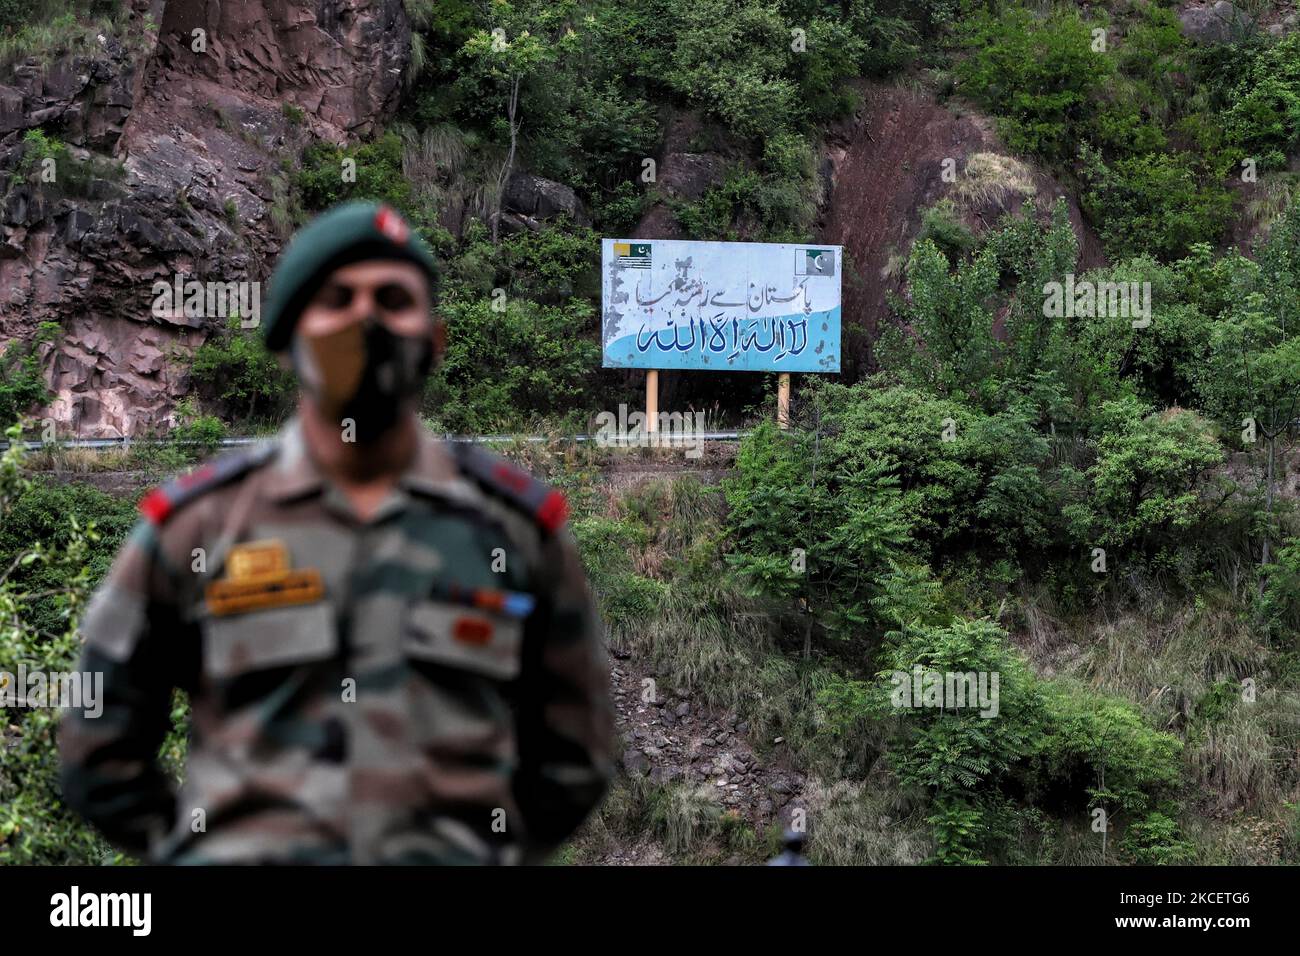 An Indian army officer stands near the Aman Setu bridge as Pakistan flag is seen on the other side on LoC in URI sector of District Baramulla, Jammu and Kashmir, India on 18 May 2021. Indiaâ€“Pakistan relations refer to the bilateral relations between India and Pakistan. The relations between the two countries have been complex and largely hostile due to a number of historical and political events. Relations between the two states have been defined by the violent partition of British India in 1947 which started the Kashmir conflict, and the numerous military conflicts fought between the two na Stock Photo